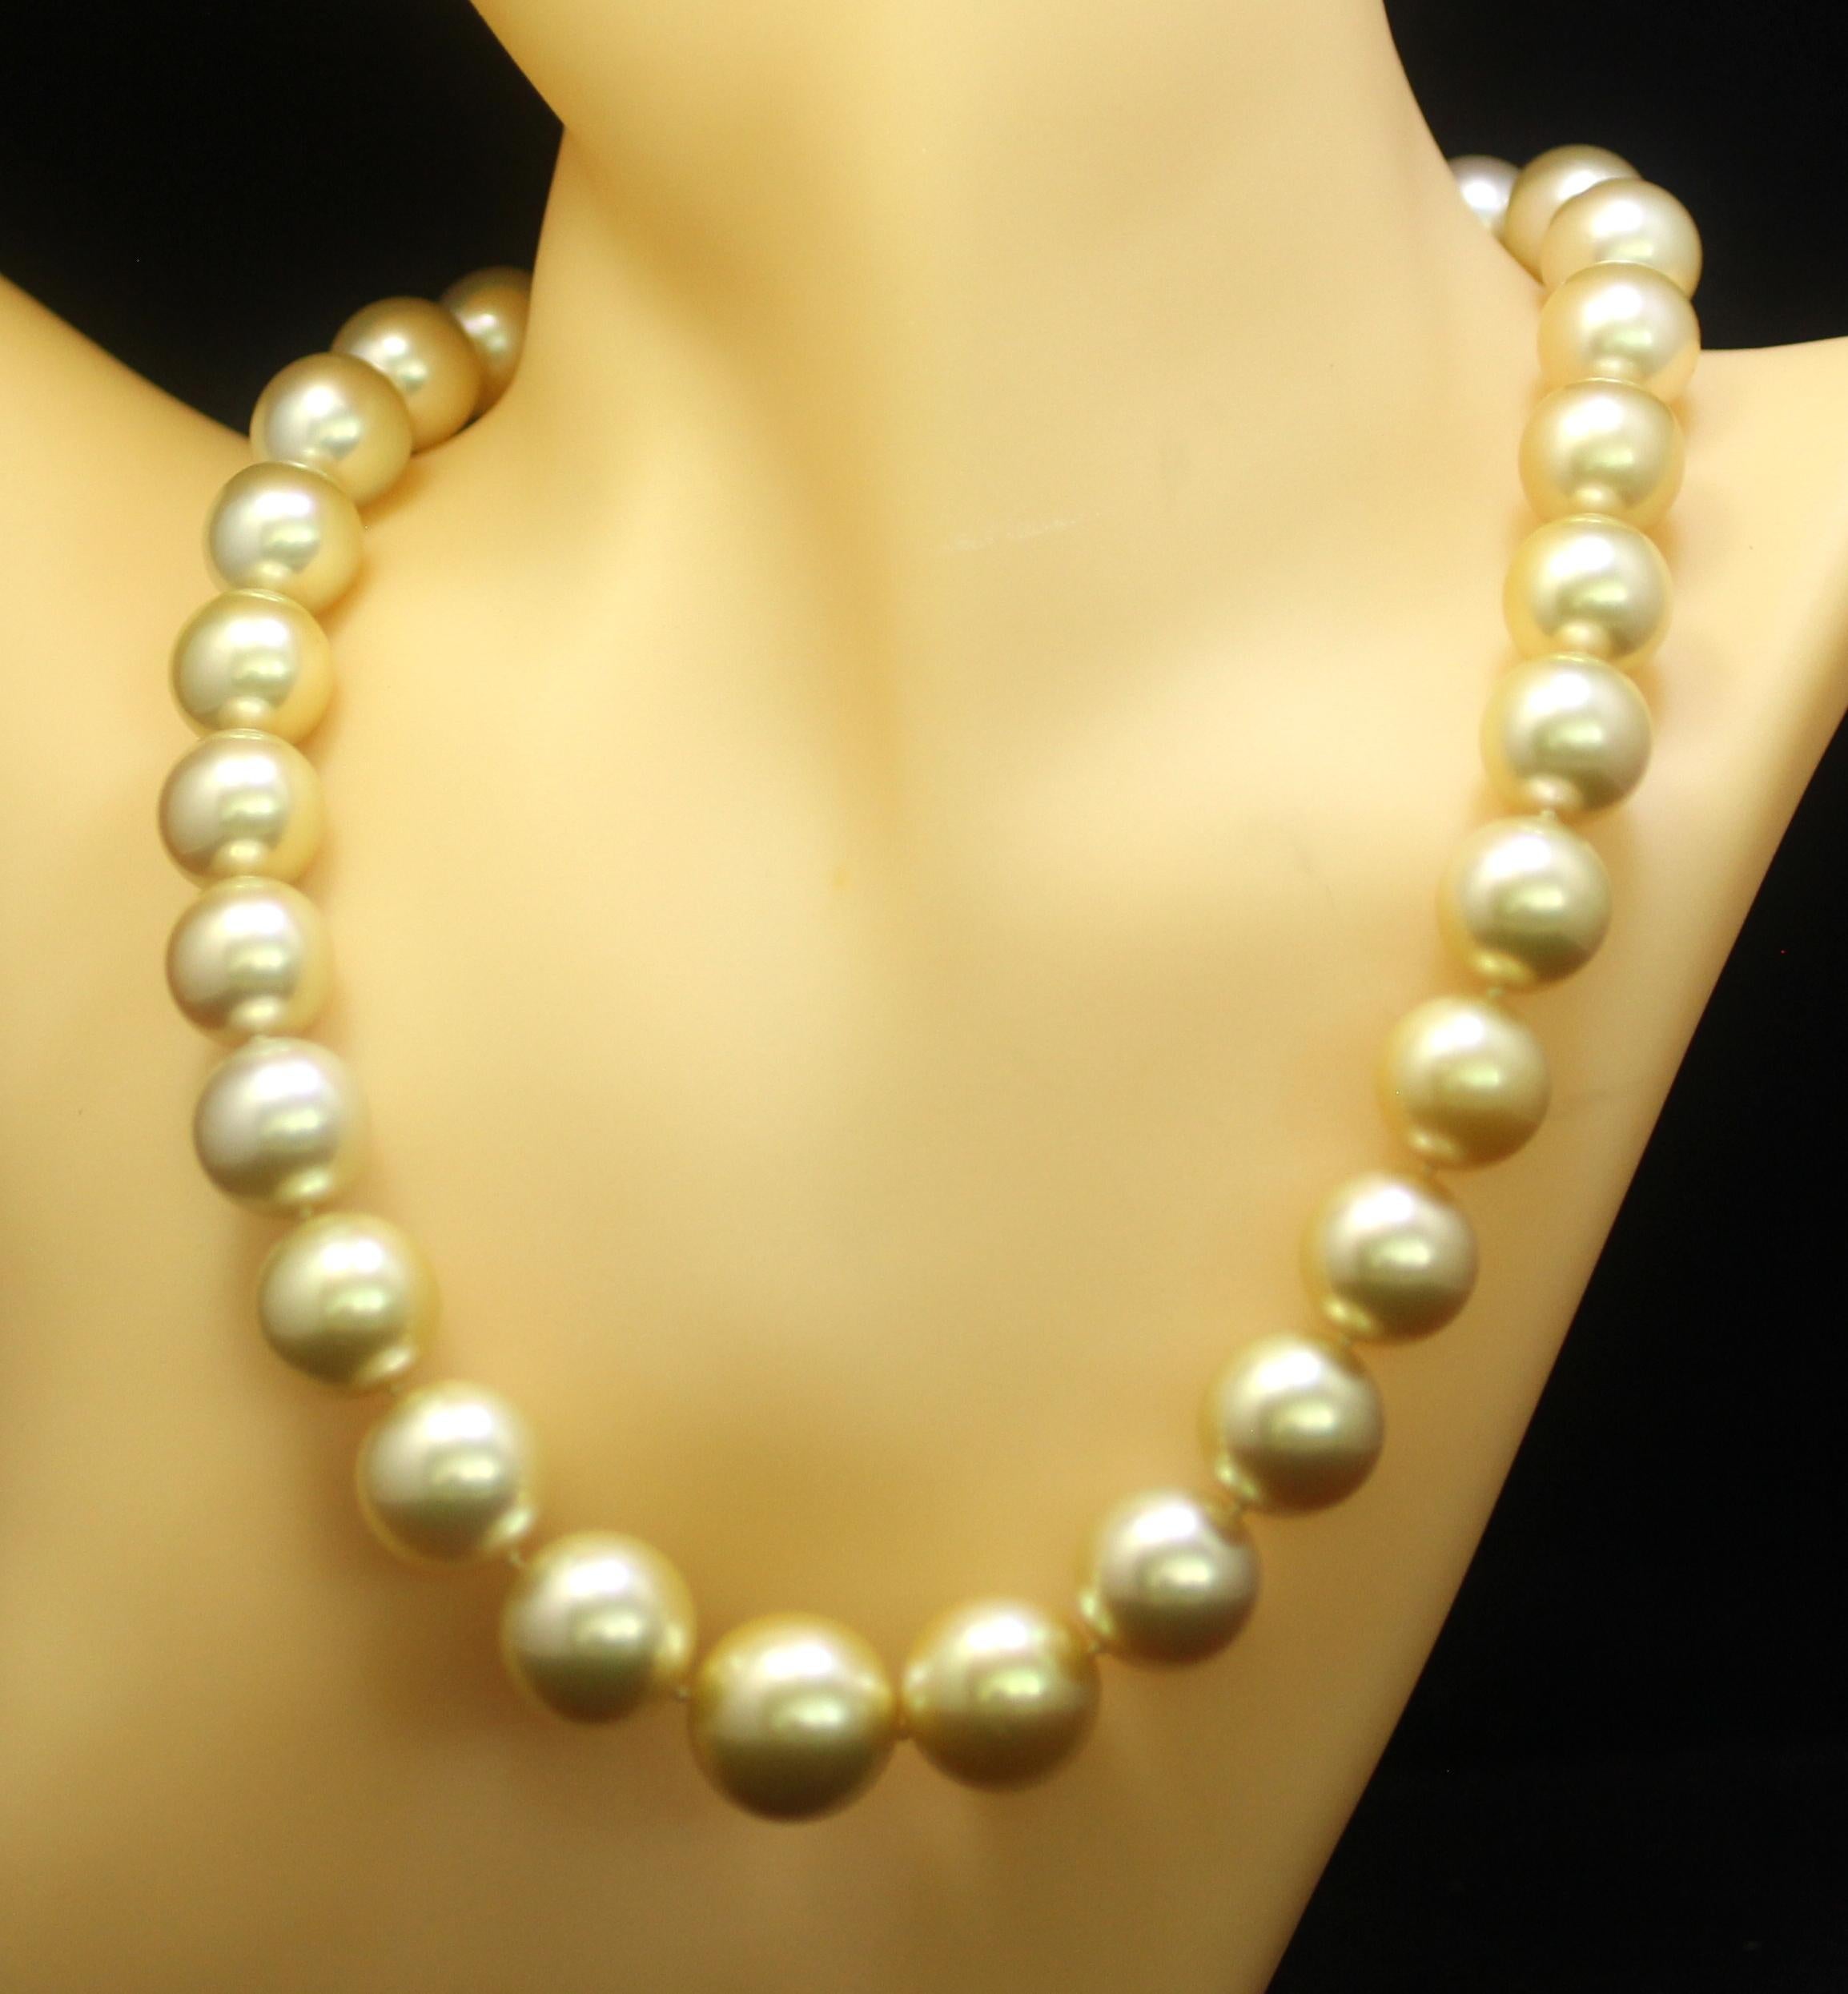 what colors do pearls naturally come in